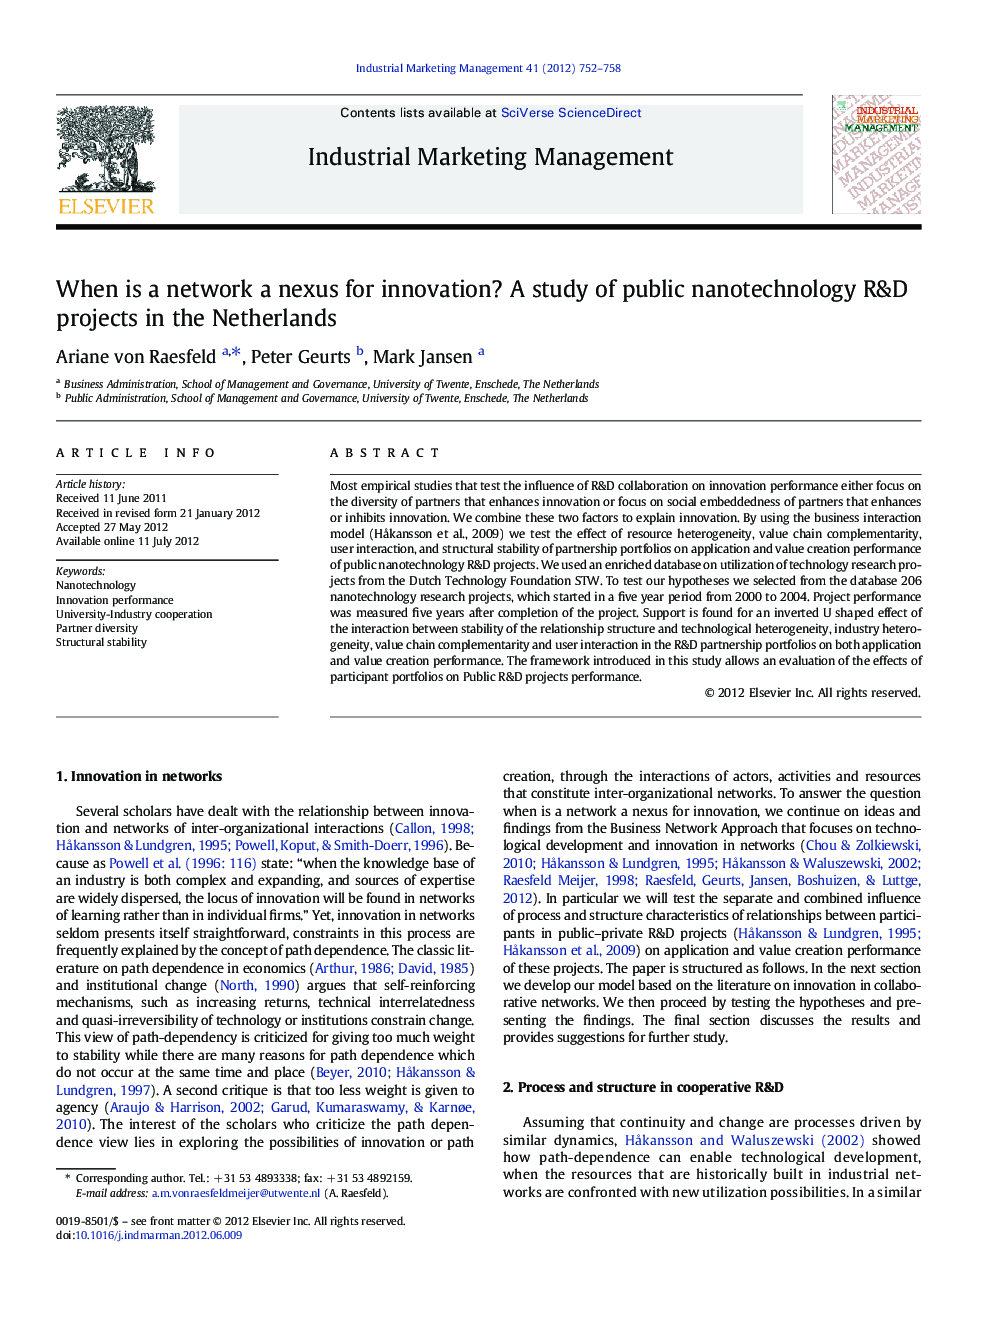 When is a network a nexus for innovation? A study of public nanotechnology R&D projects in the Netherlands